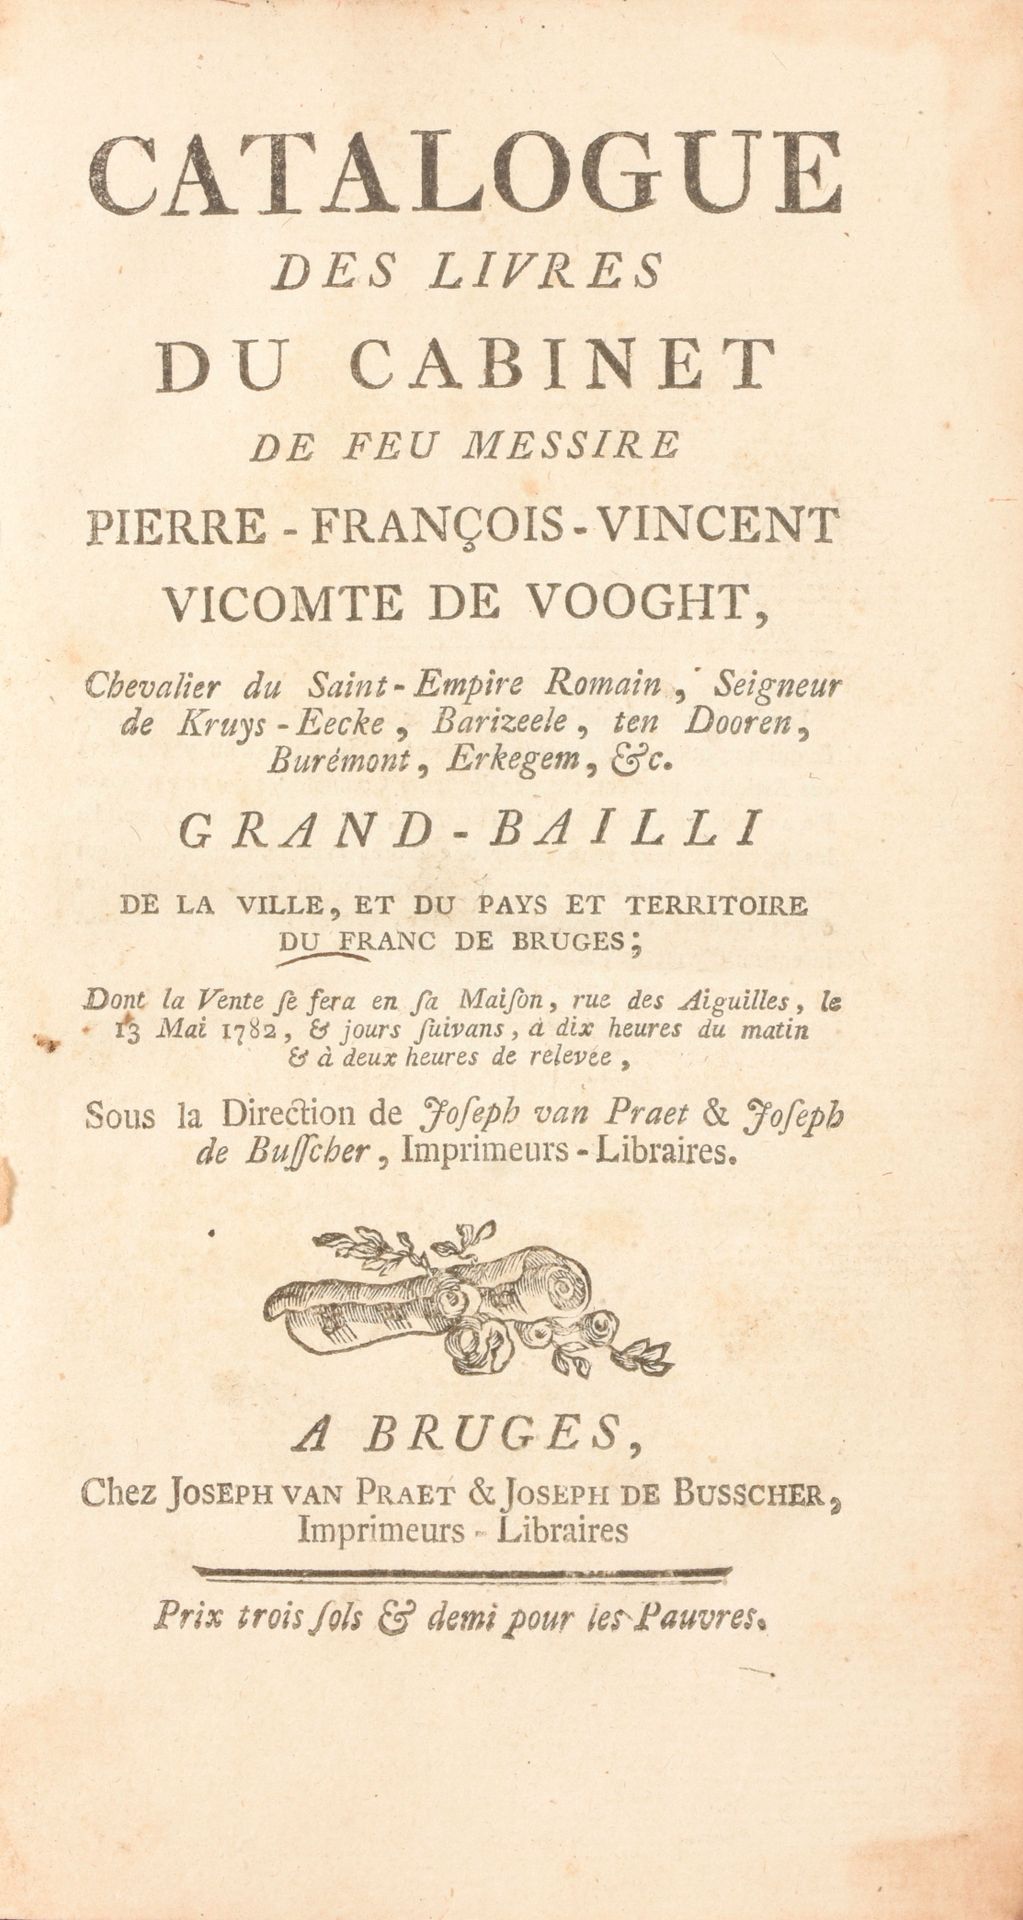 Catalogus Catalogue of books from the cabinet of the late Messire Pierre-Françoi&hellip;